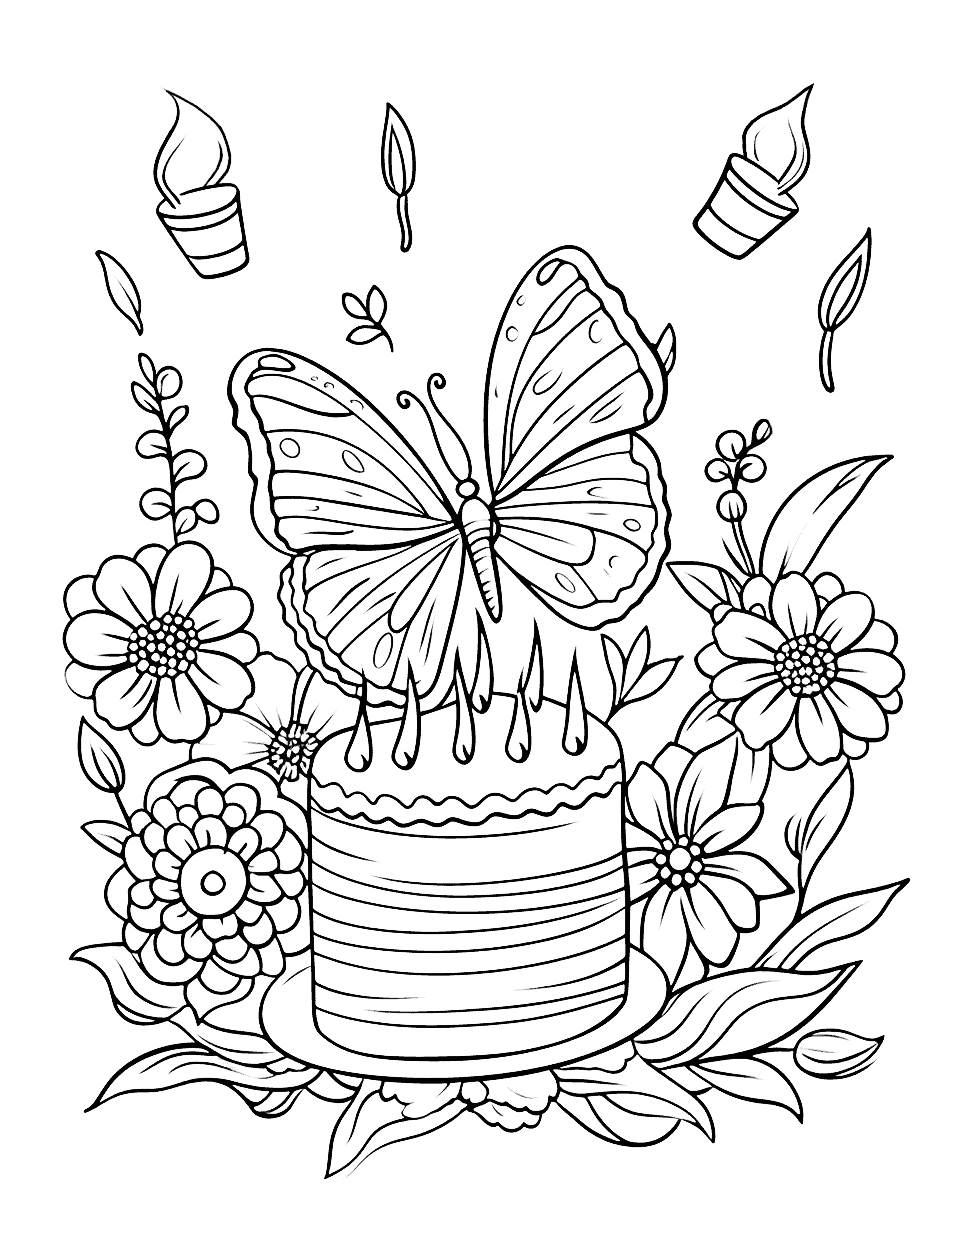 Butterfly's Birthday in the Garden Happy Coloring Page - A butterfly celebrating its birthday among the flowers.